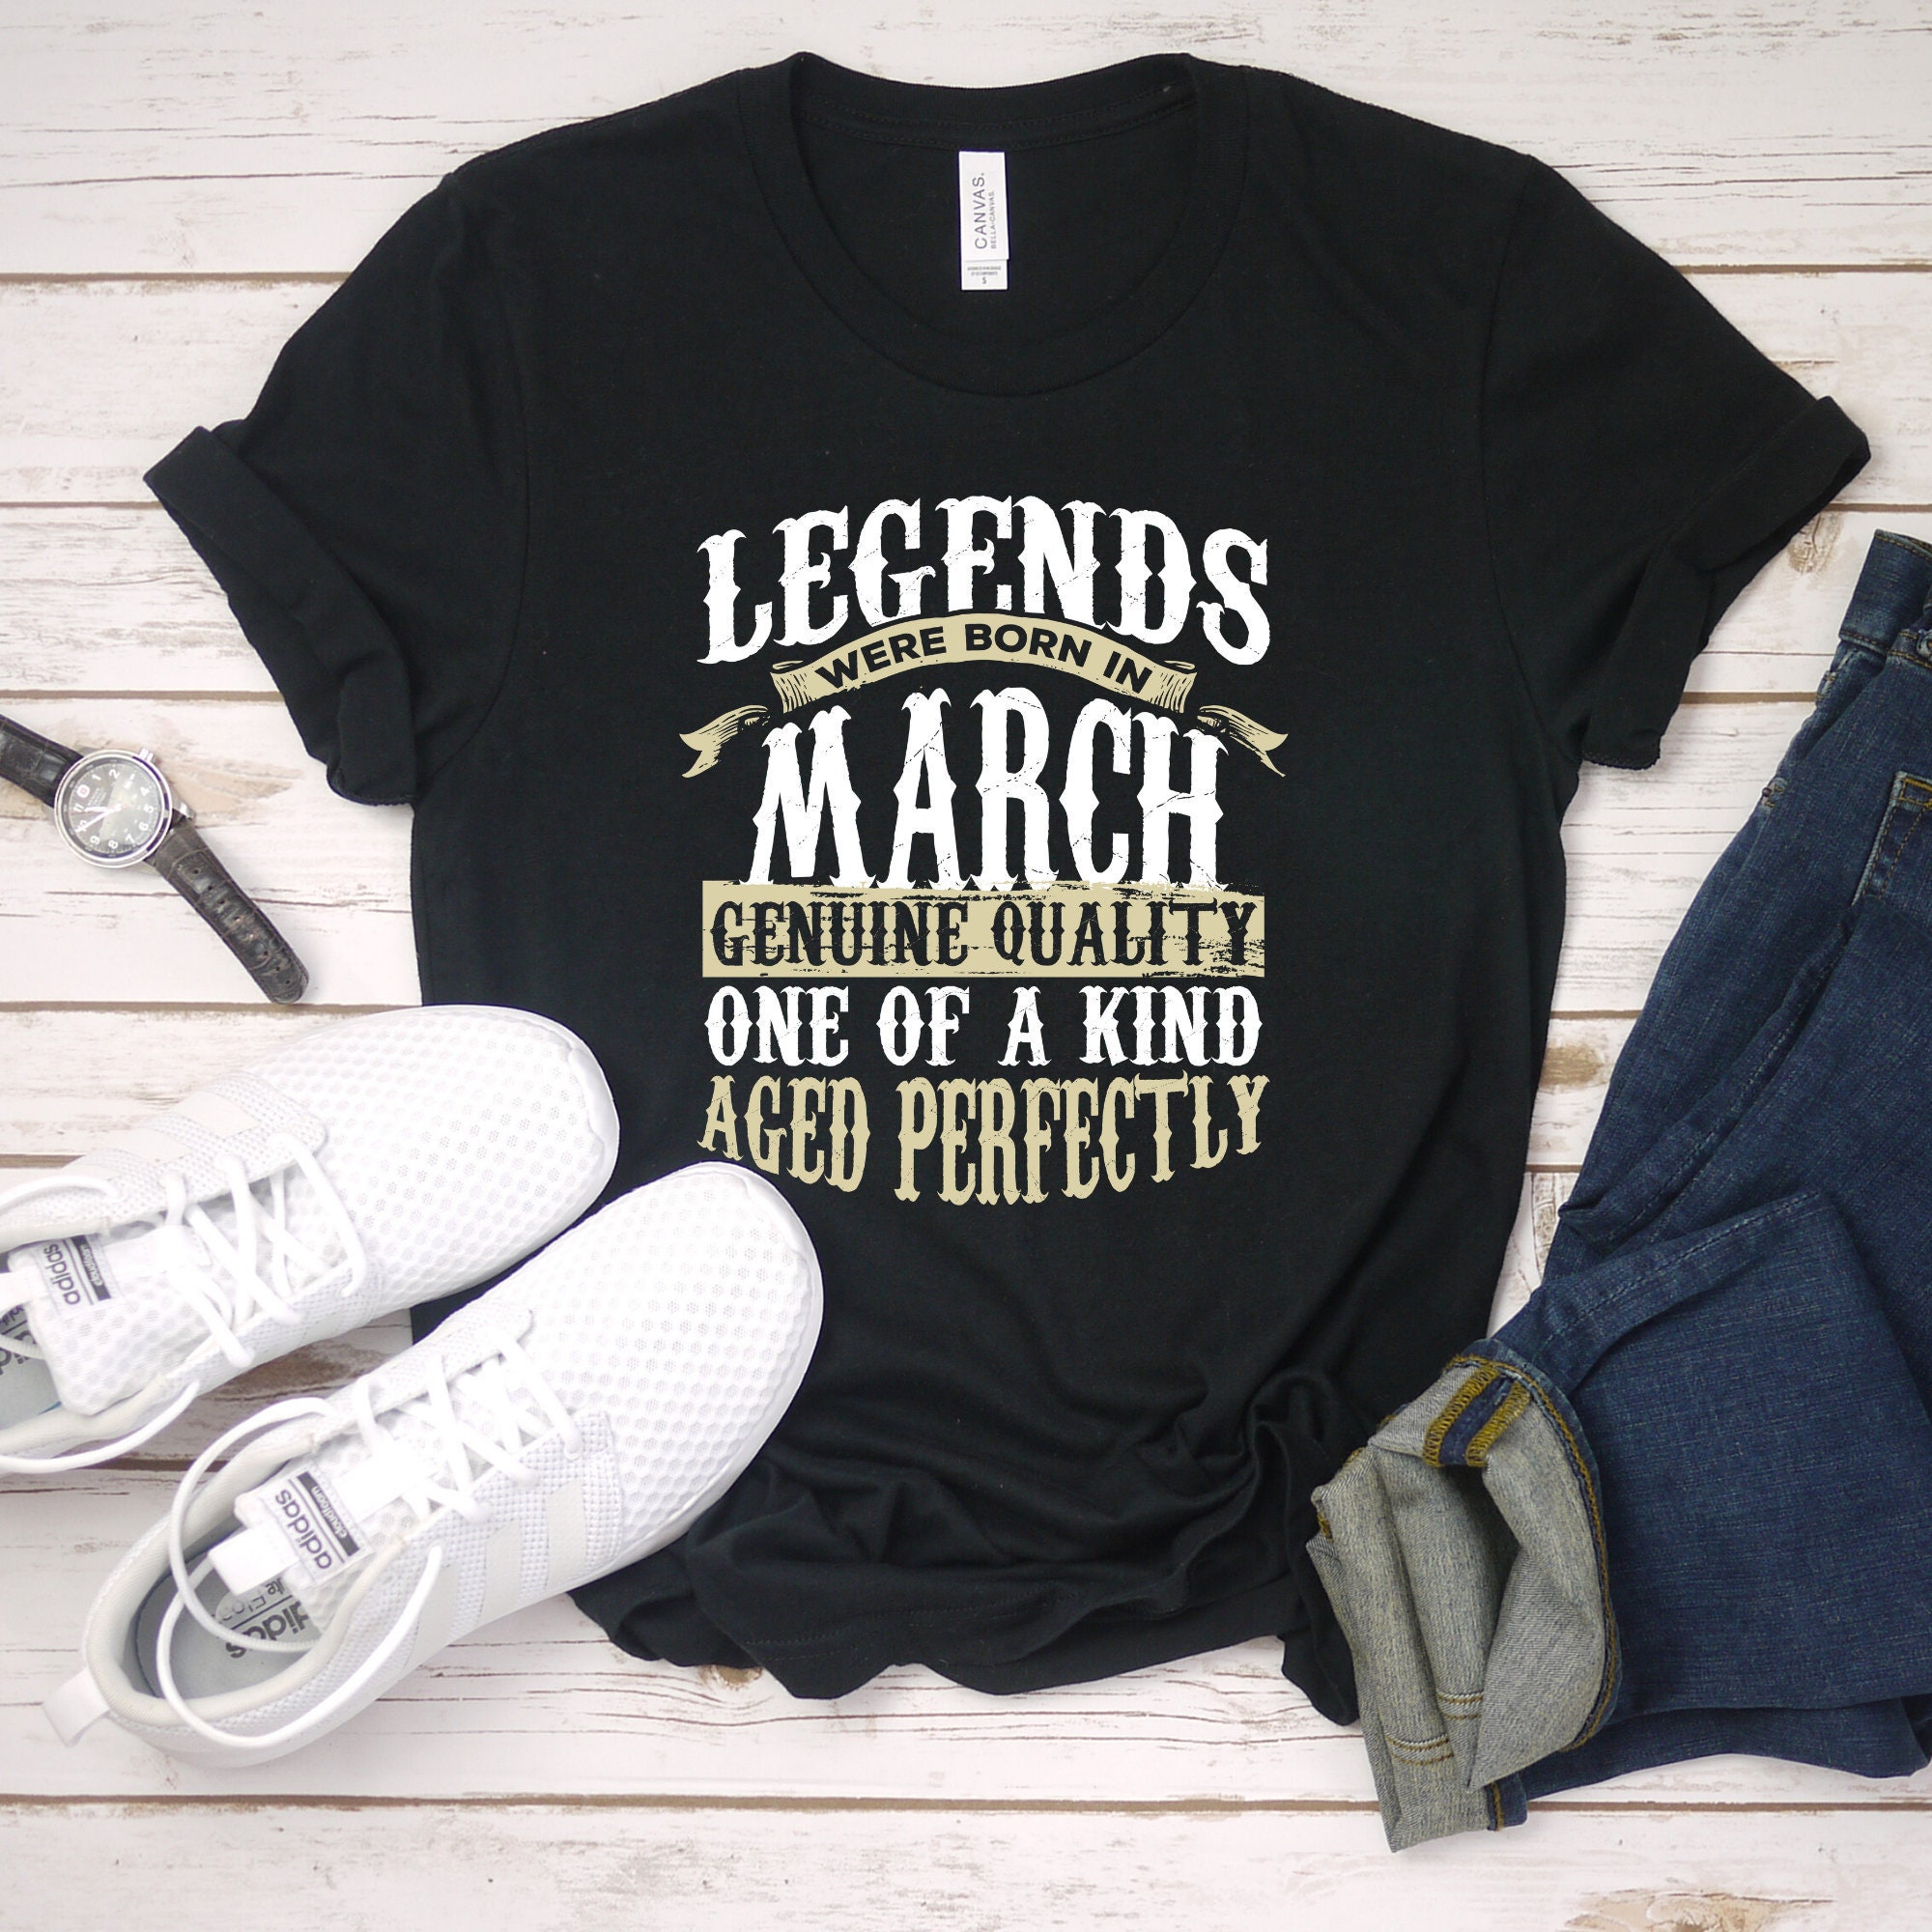 Legends Were Born in March Aged Perfectly T-Shirt, March Gift Idea